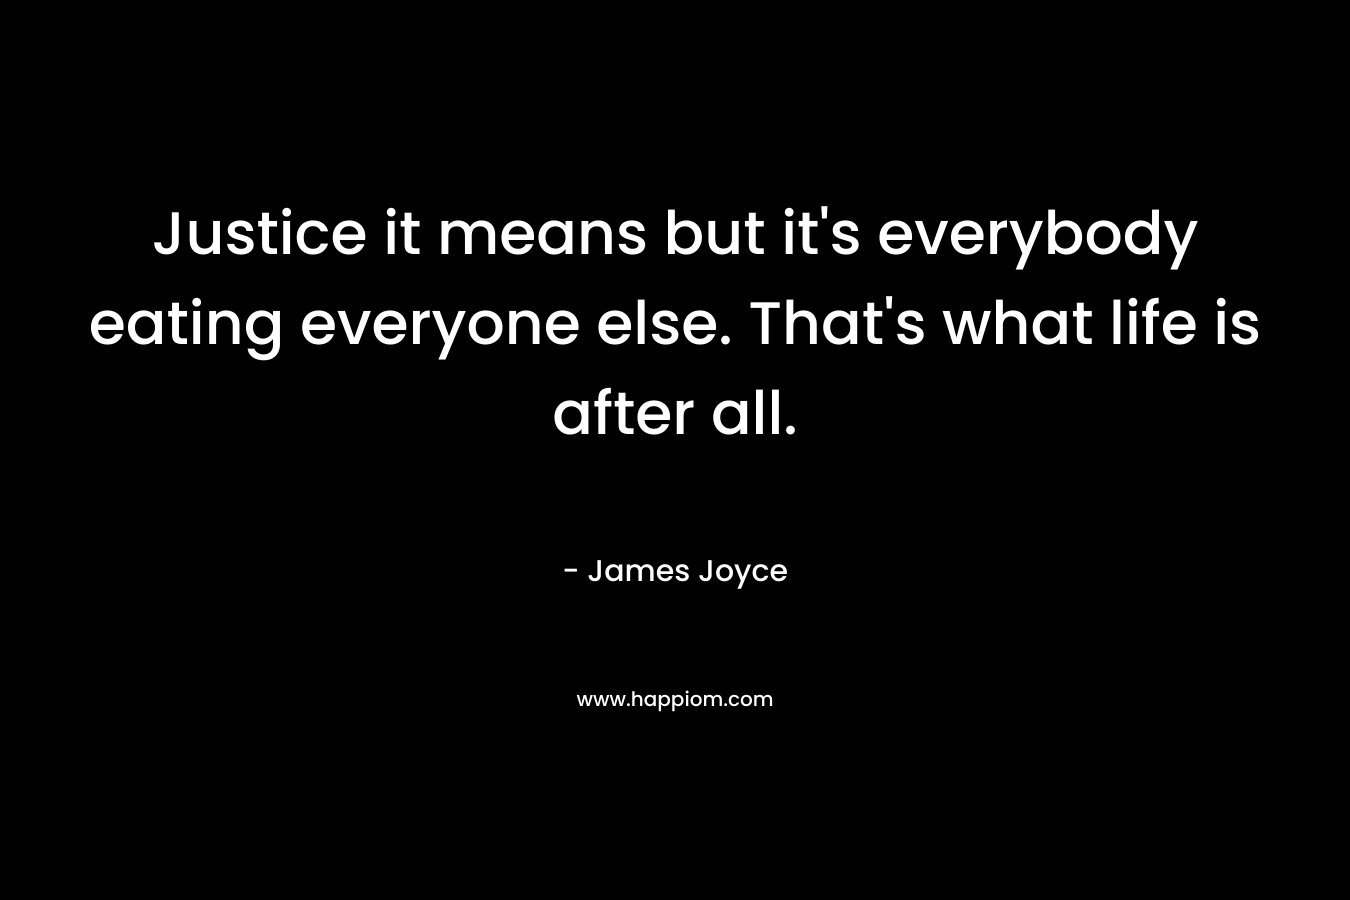 Justice it means but it’s everybody eating everyone else. That’s what life is after all. – James Joyce